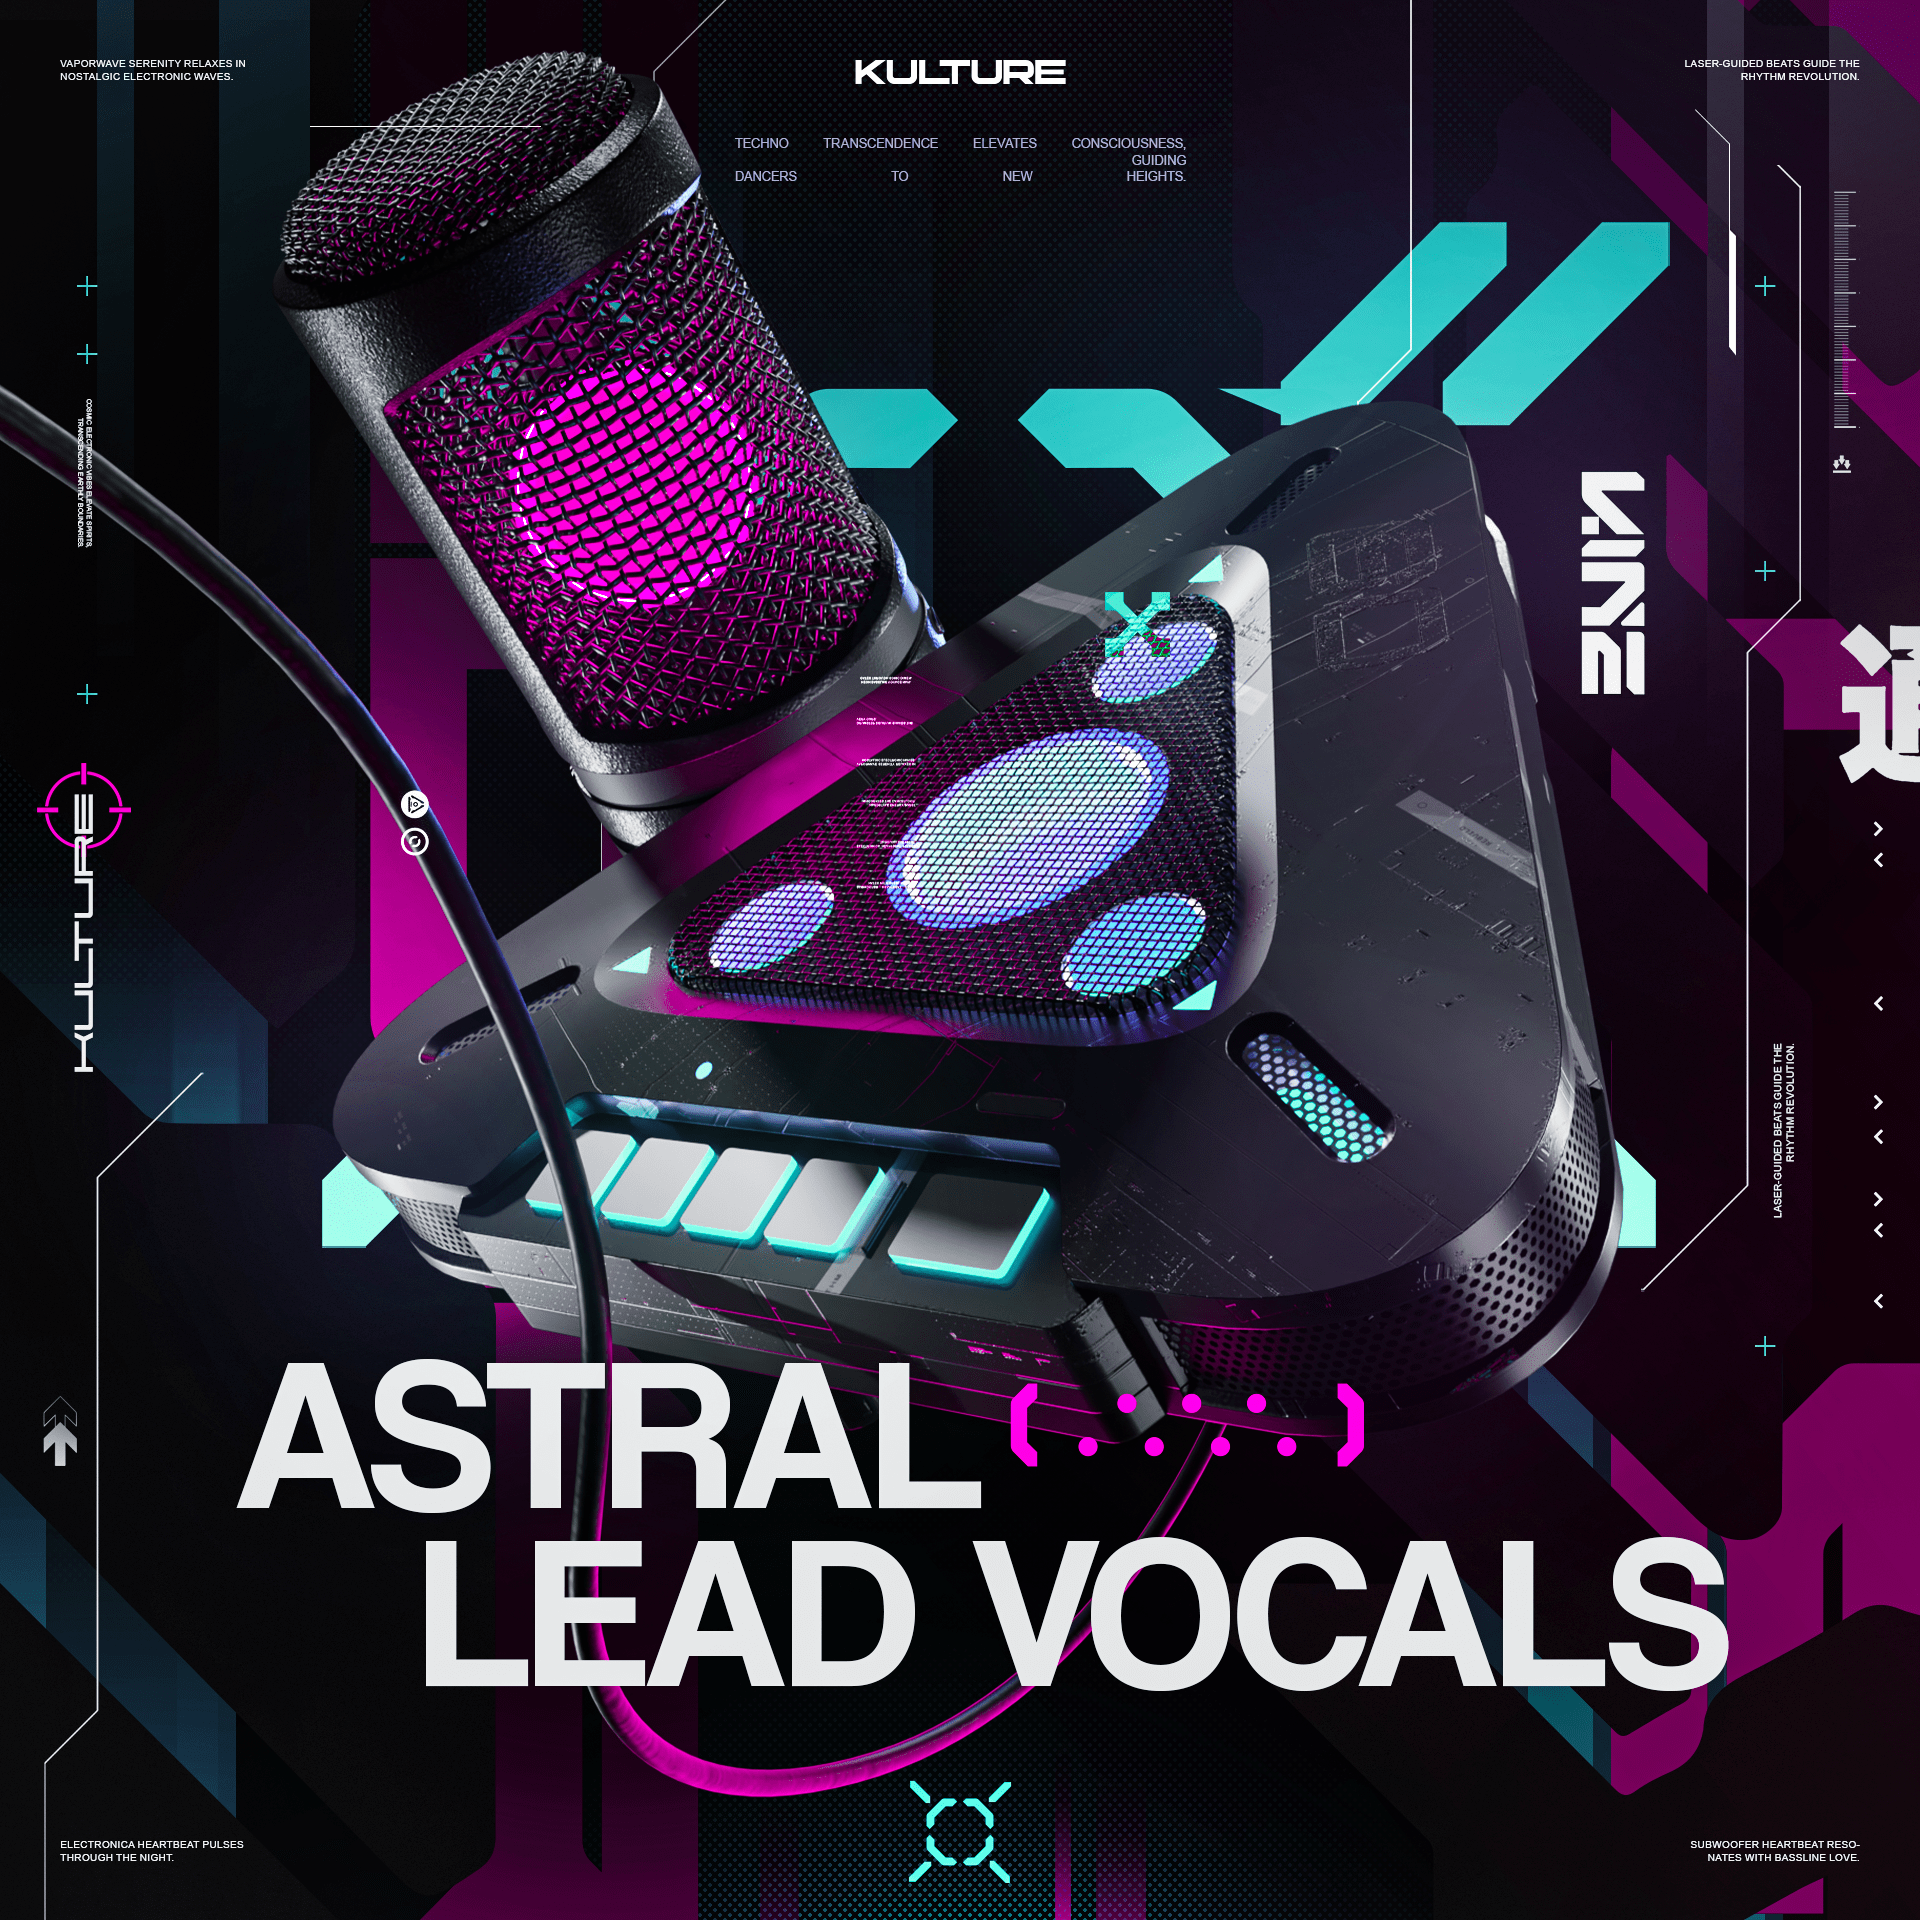 Astral Lead Vocals